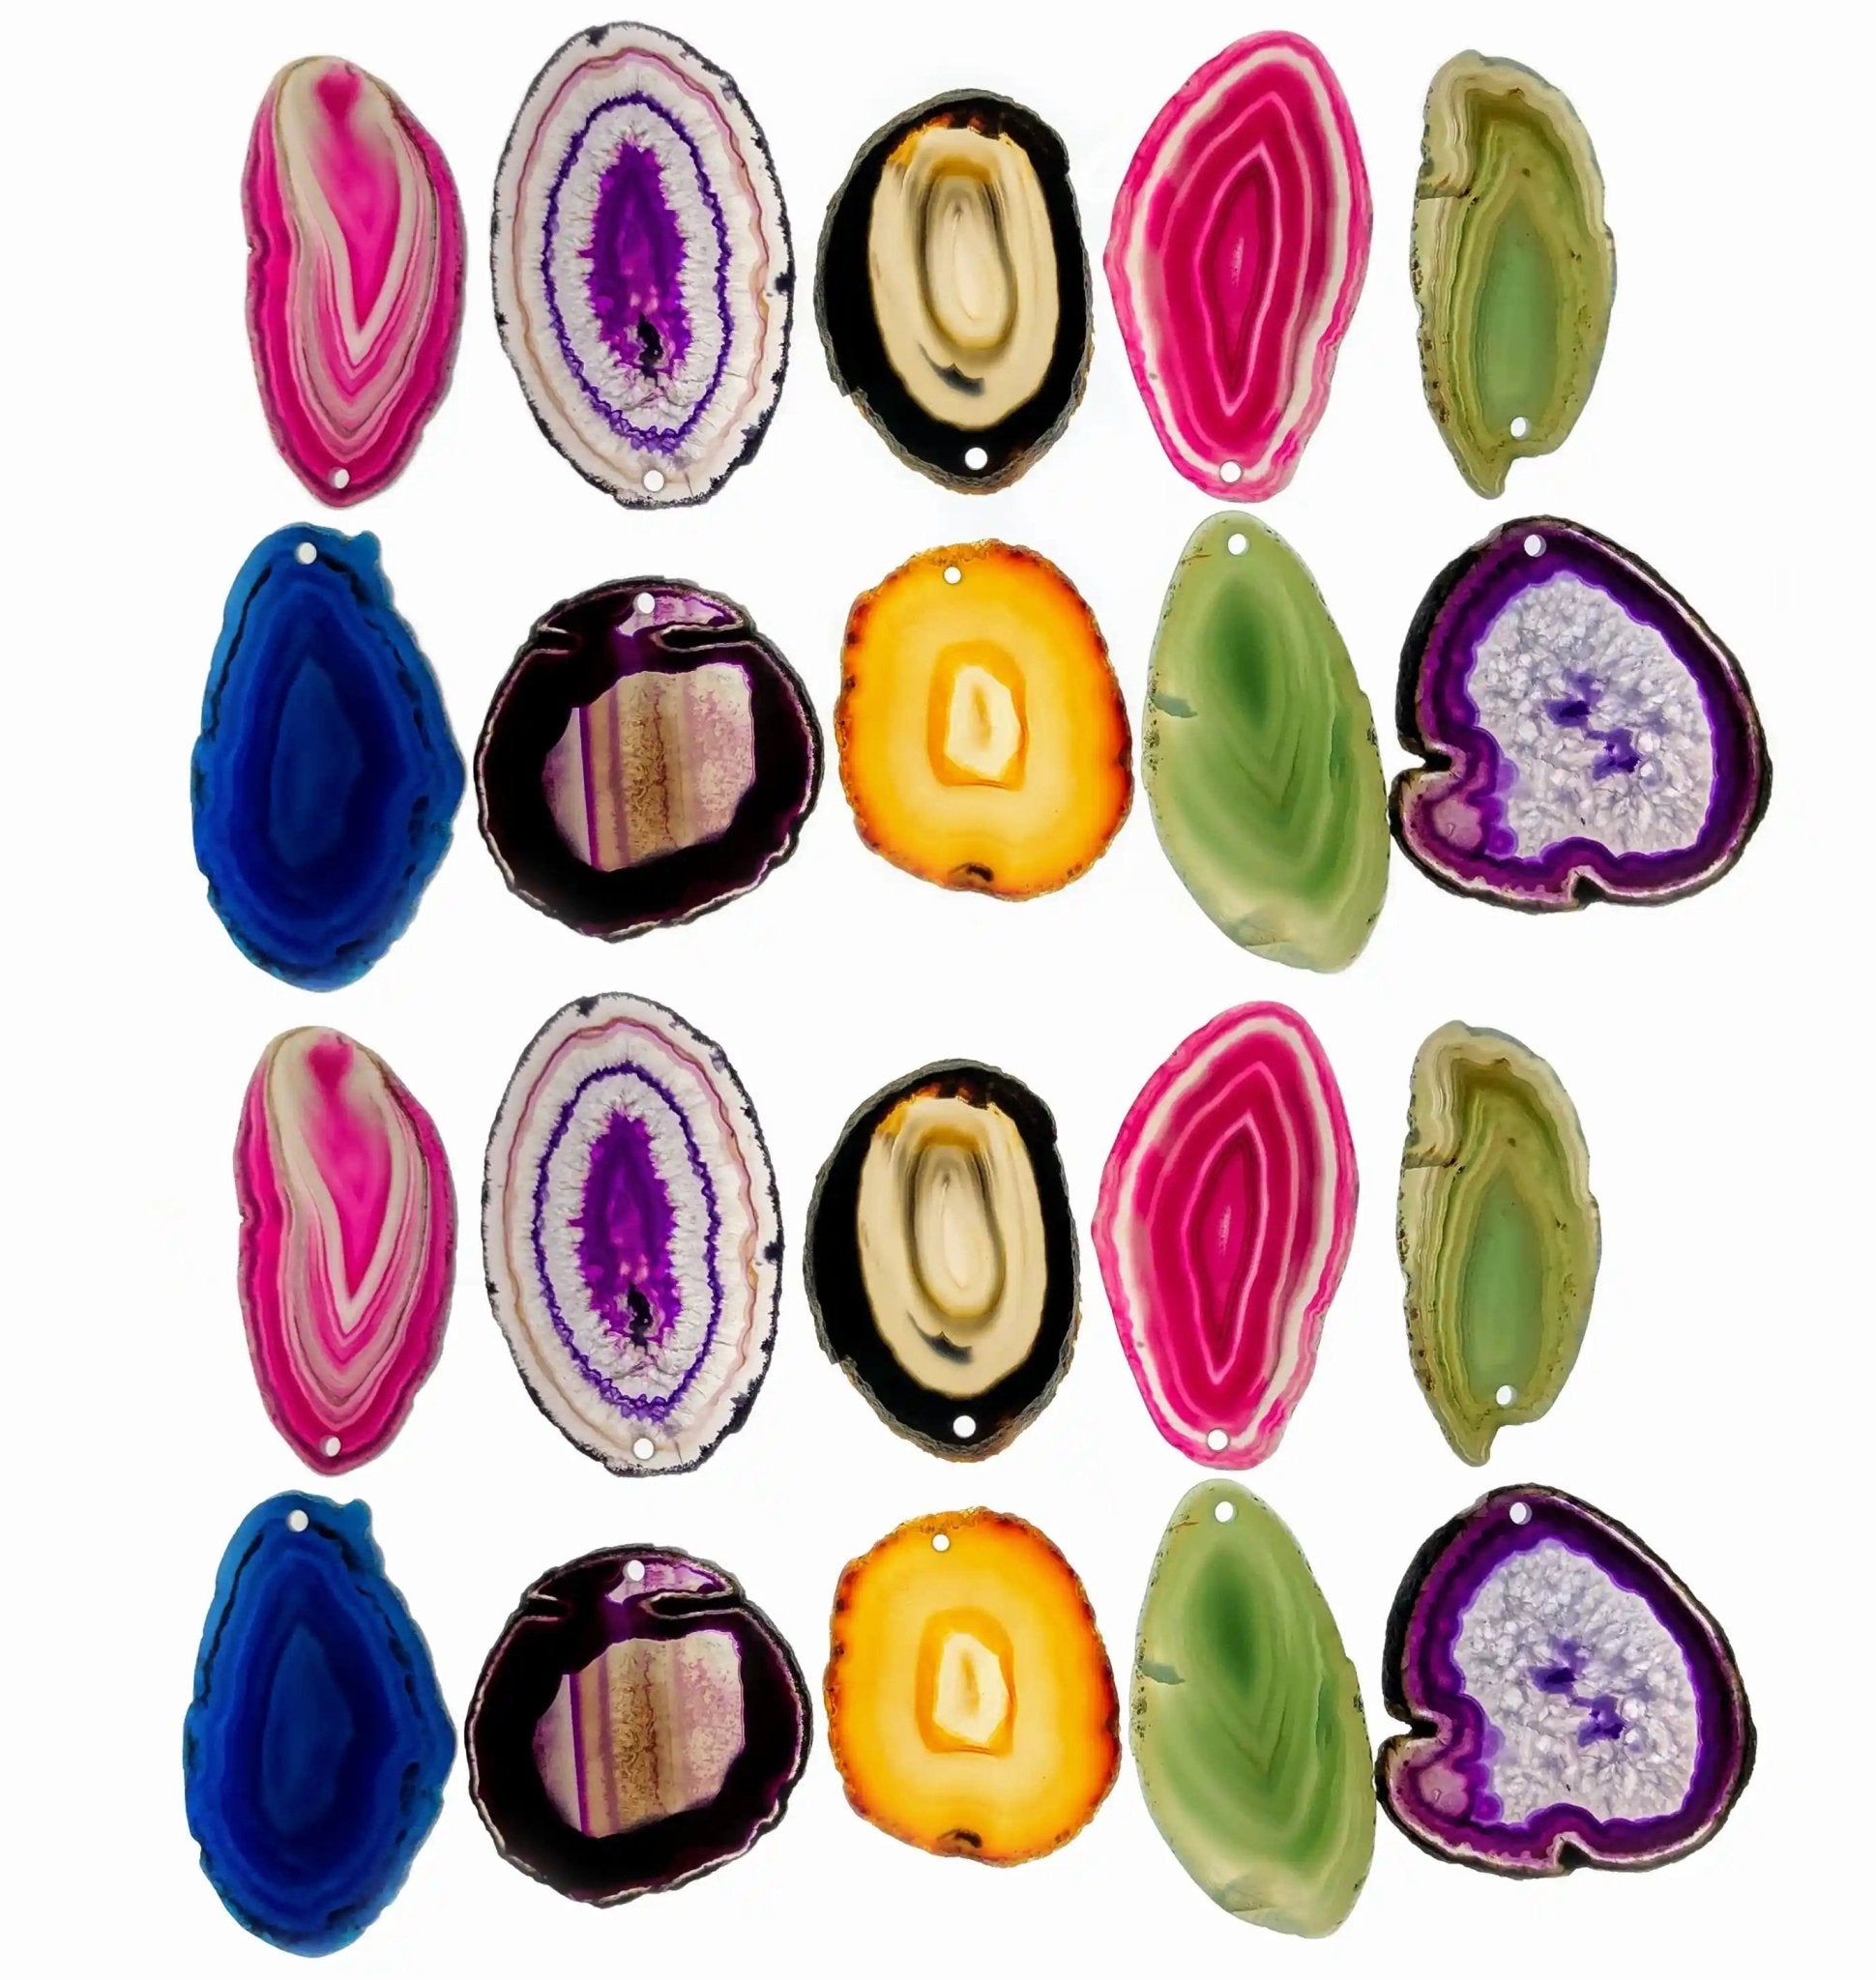 Polished Natural and Dyed Agate Slices, mixed colors, w/ top drilled pendant hole, 1.5" to 3", 10 slices #5053COHL - Brazil GemsBrazil GemsPolished Natural and Dyed Agate Slices, mixed colors, w/ top drilled pendant hole, 1.5" to 3", 10 slices #5053COHLSlices for Crafts5053COHL